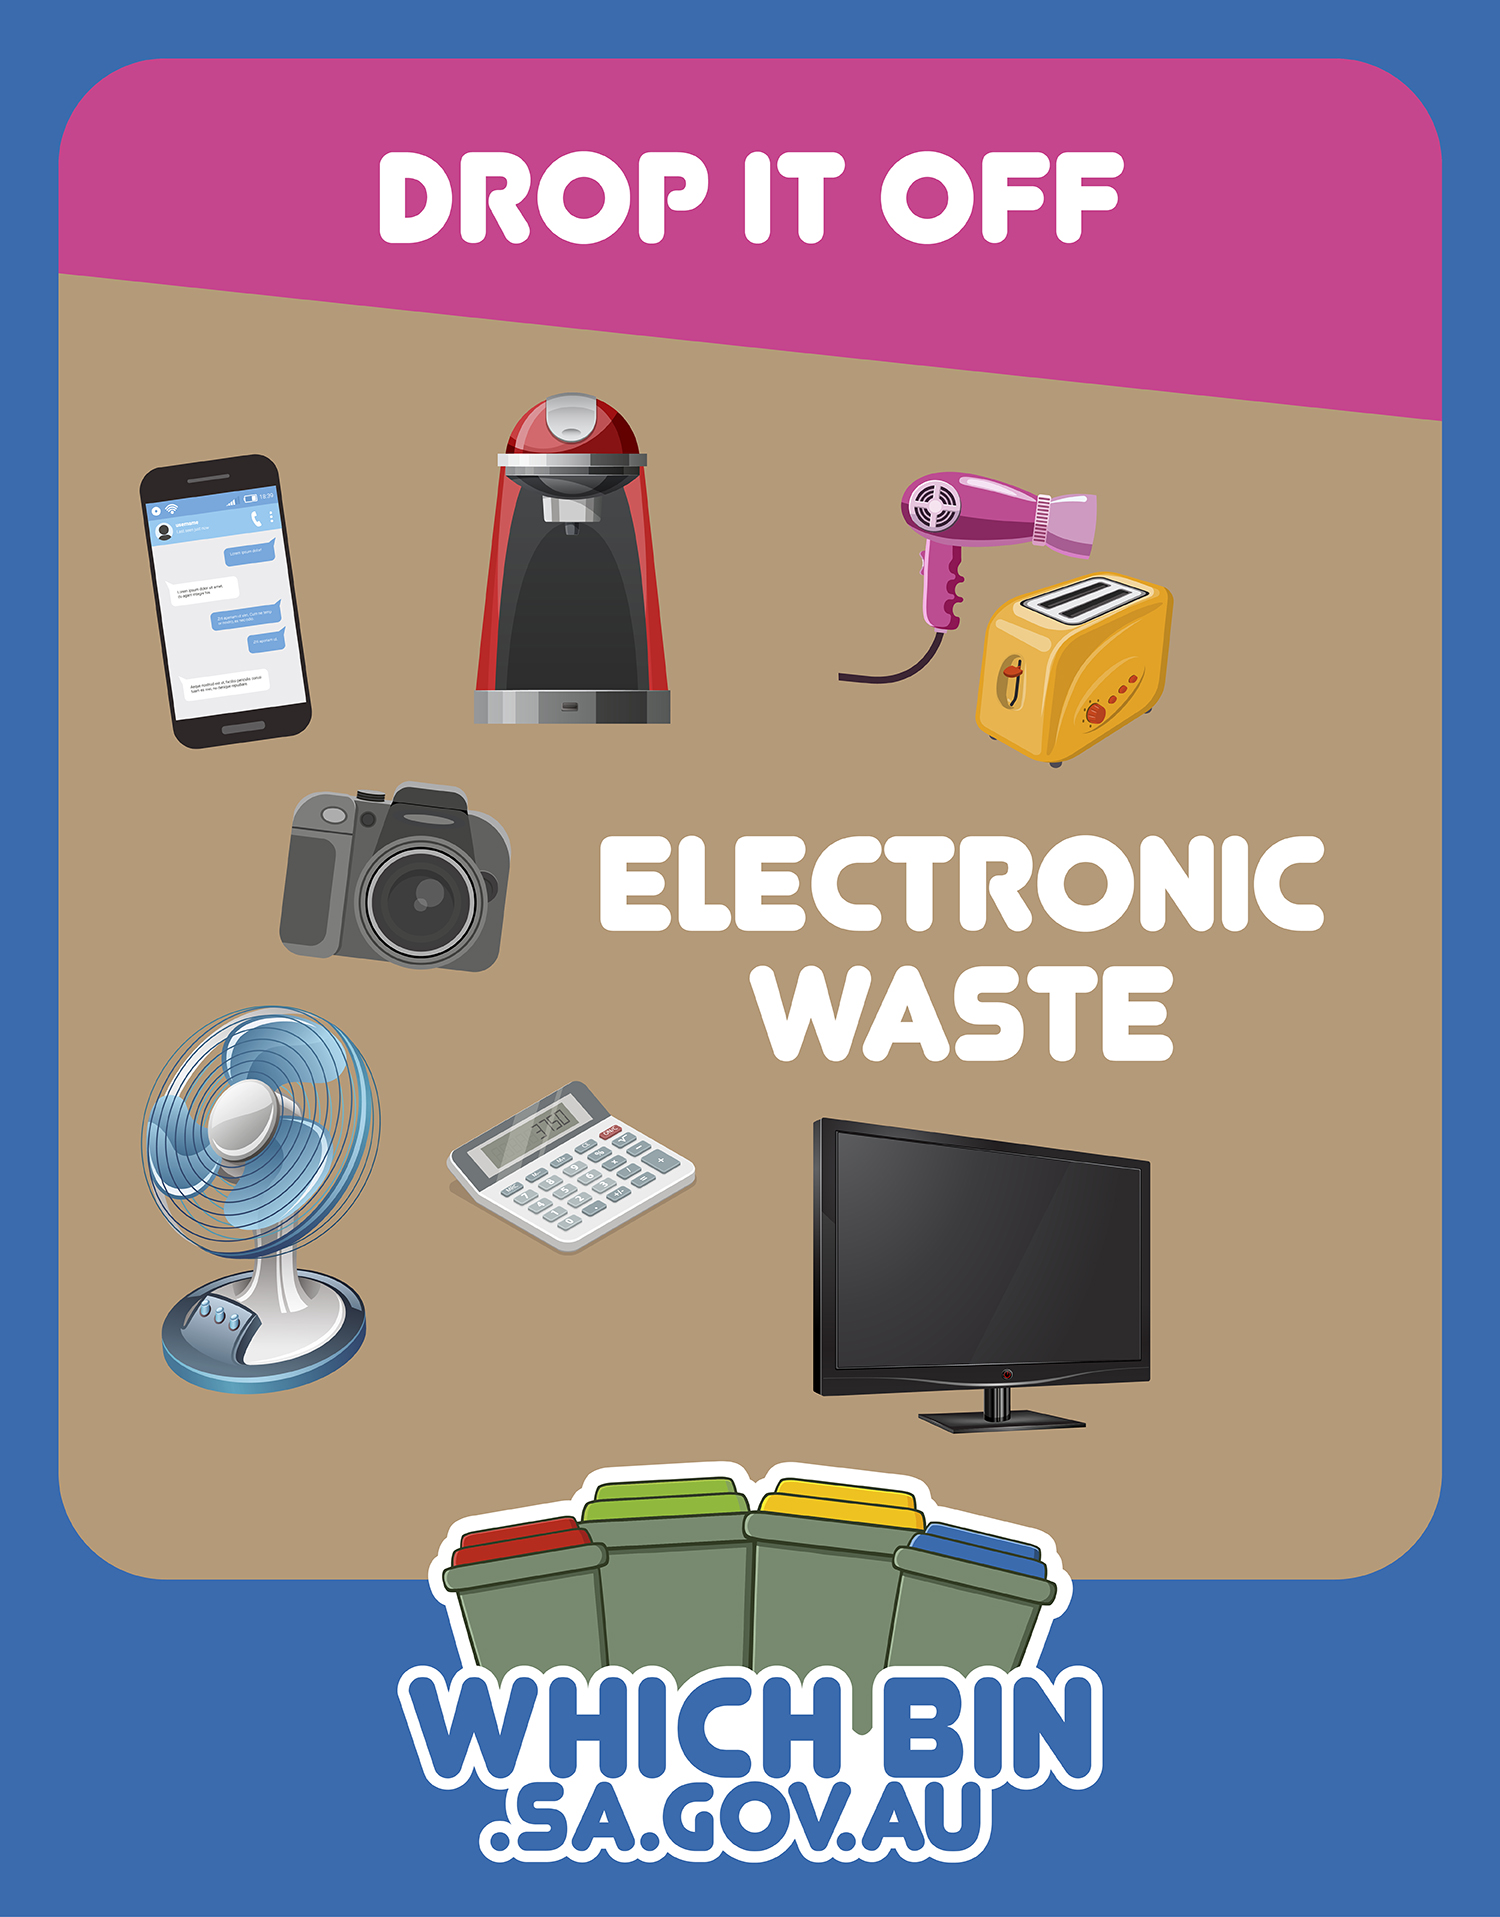 Drop it off: electronic waste